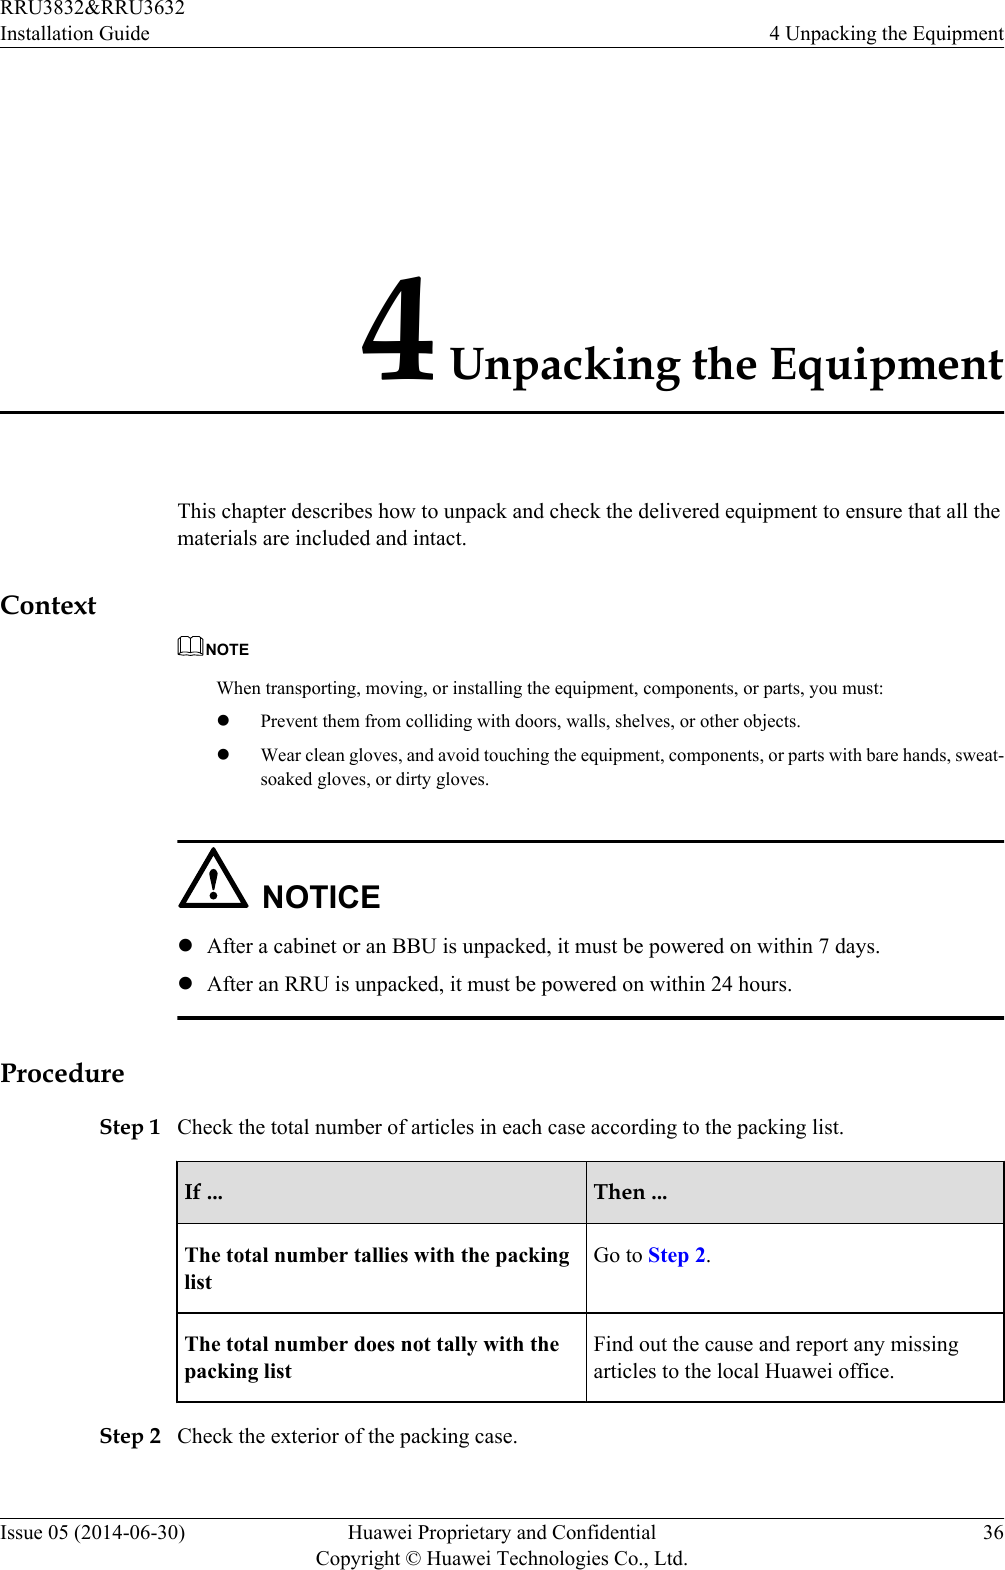 4 Unpacking the EquipmentThis chapter describes how to unpack and check the delivered equipment to ensure that all thematerials are included and intact.ContextNOTEWhen transporting, moving, or installing the equipment, components, or parts, you must:lPrevent them from colliding with doors, walls, shelves, or other objects.lWear clean gloves, and avoid touching the equipment, components, or parts with bare hands, sweat-soaked gloves, or dirty gloves.NOTICElAfter a cabinet or an BBU is unpacked, it must be powered on within 7 days.lAfter an RRU is unpacked, it must be powered on within 24 hours.ProcedureStep 1 Check the total number of articles in each case according to the packing list.If ... Then ...The total number tallies with the packinglistGo to Step 2.The total number does not tally with thepacking listFind out the cause and report any missingarticles to the local Huawei office.Step 2 Check the exterior of the packing case.RRU3832&amp;RRU3632Installation Guide 4 Unpacking the EquipmentIssue 05 (2014-06-30) Huawei Proprietary and ConfidentialCopyright © Huawei Technologies Co., Ltd.36